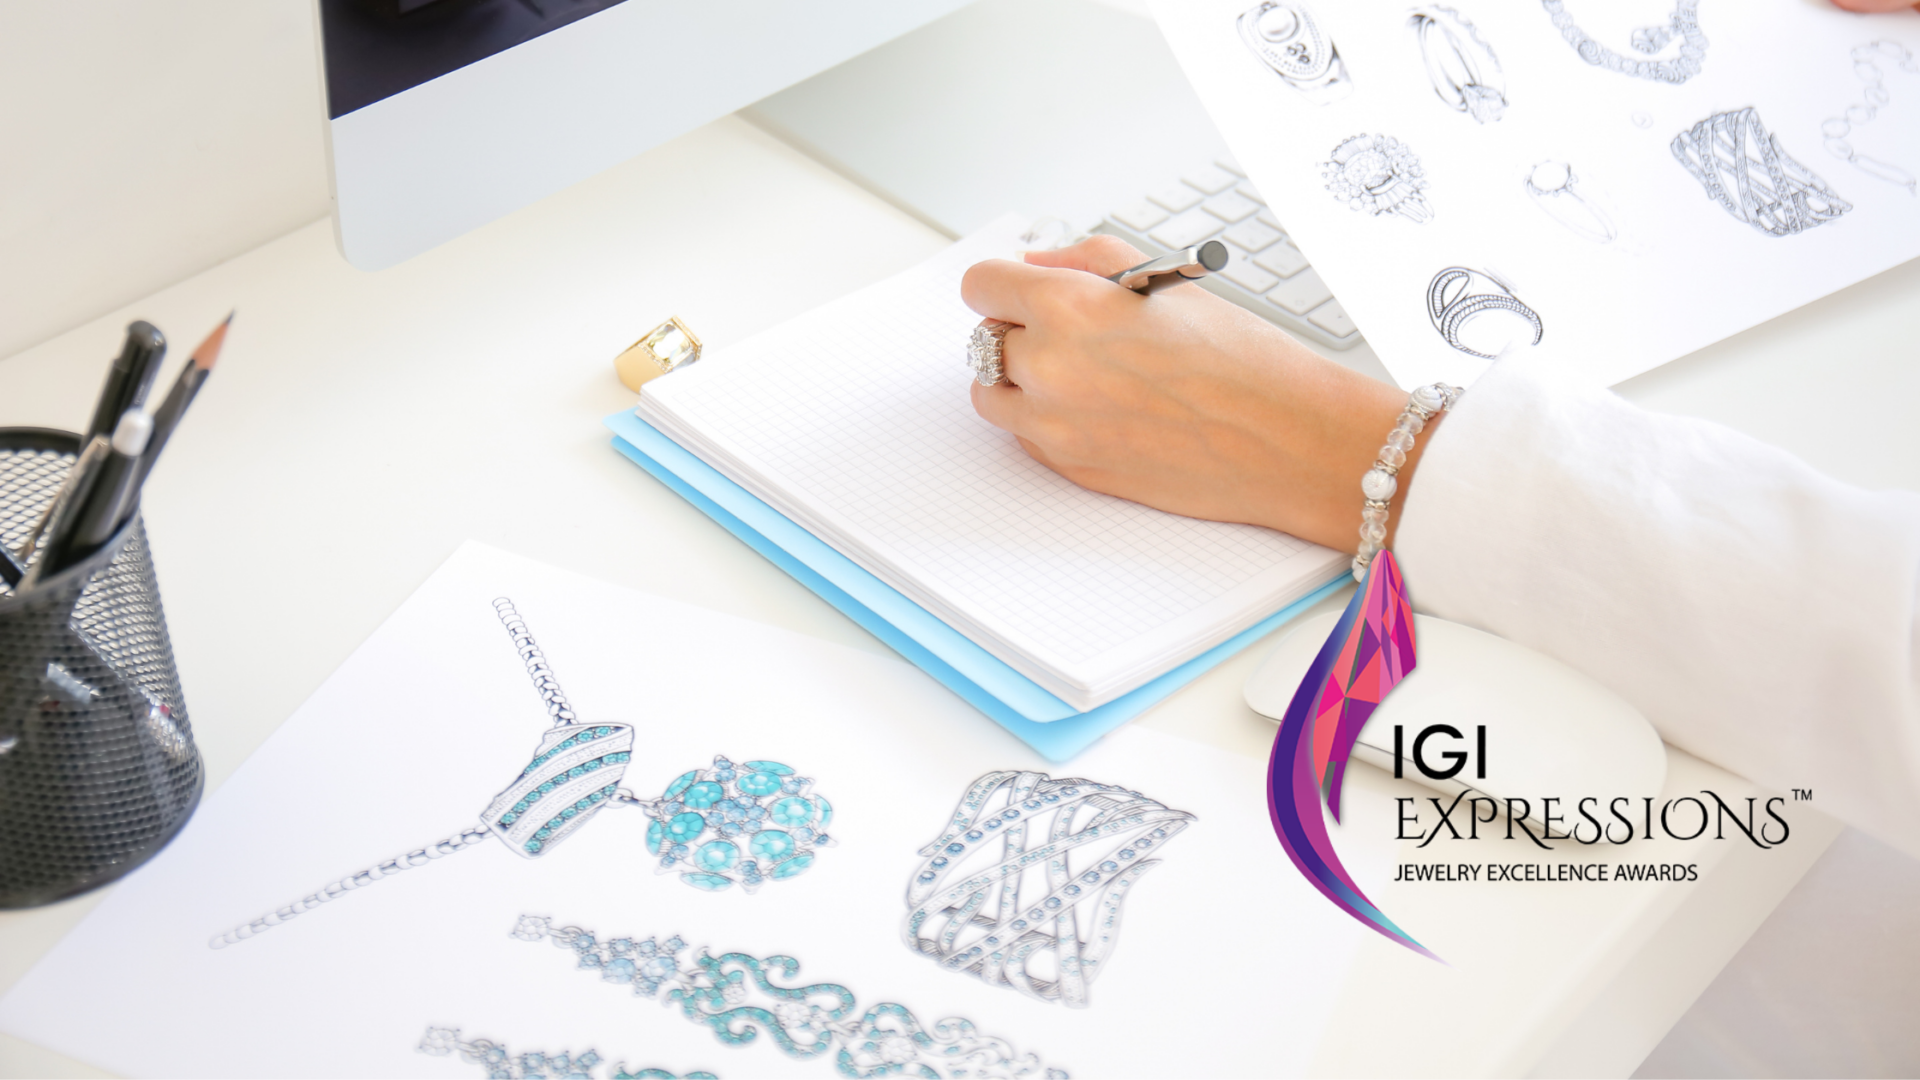 IGI Expressions™ | A Global Jewelry Design Competition